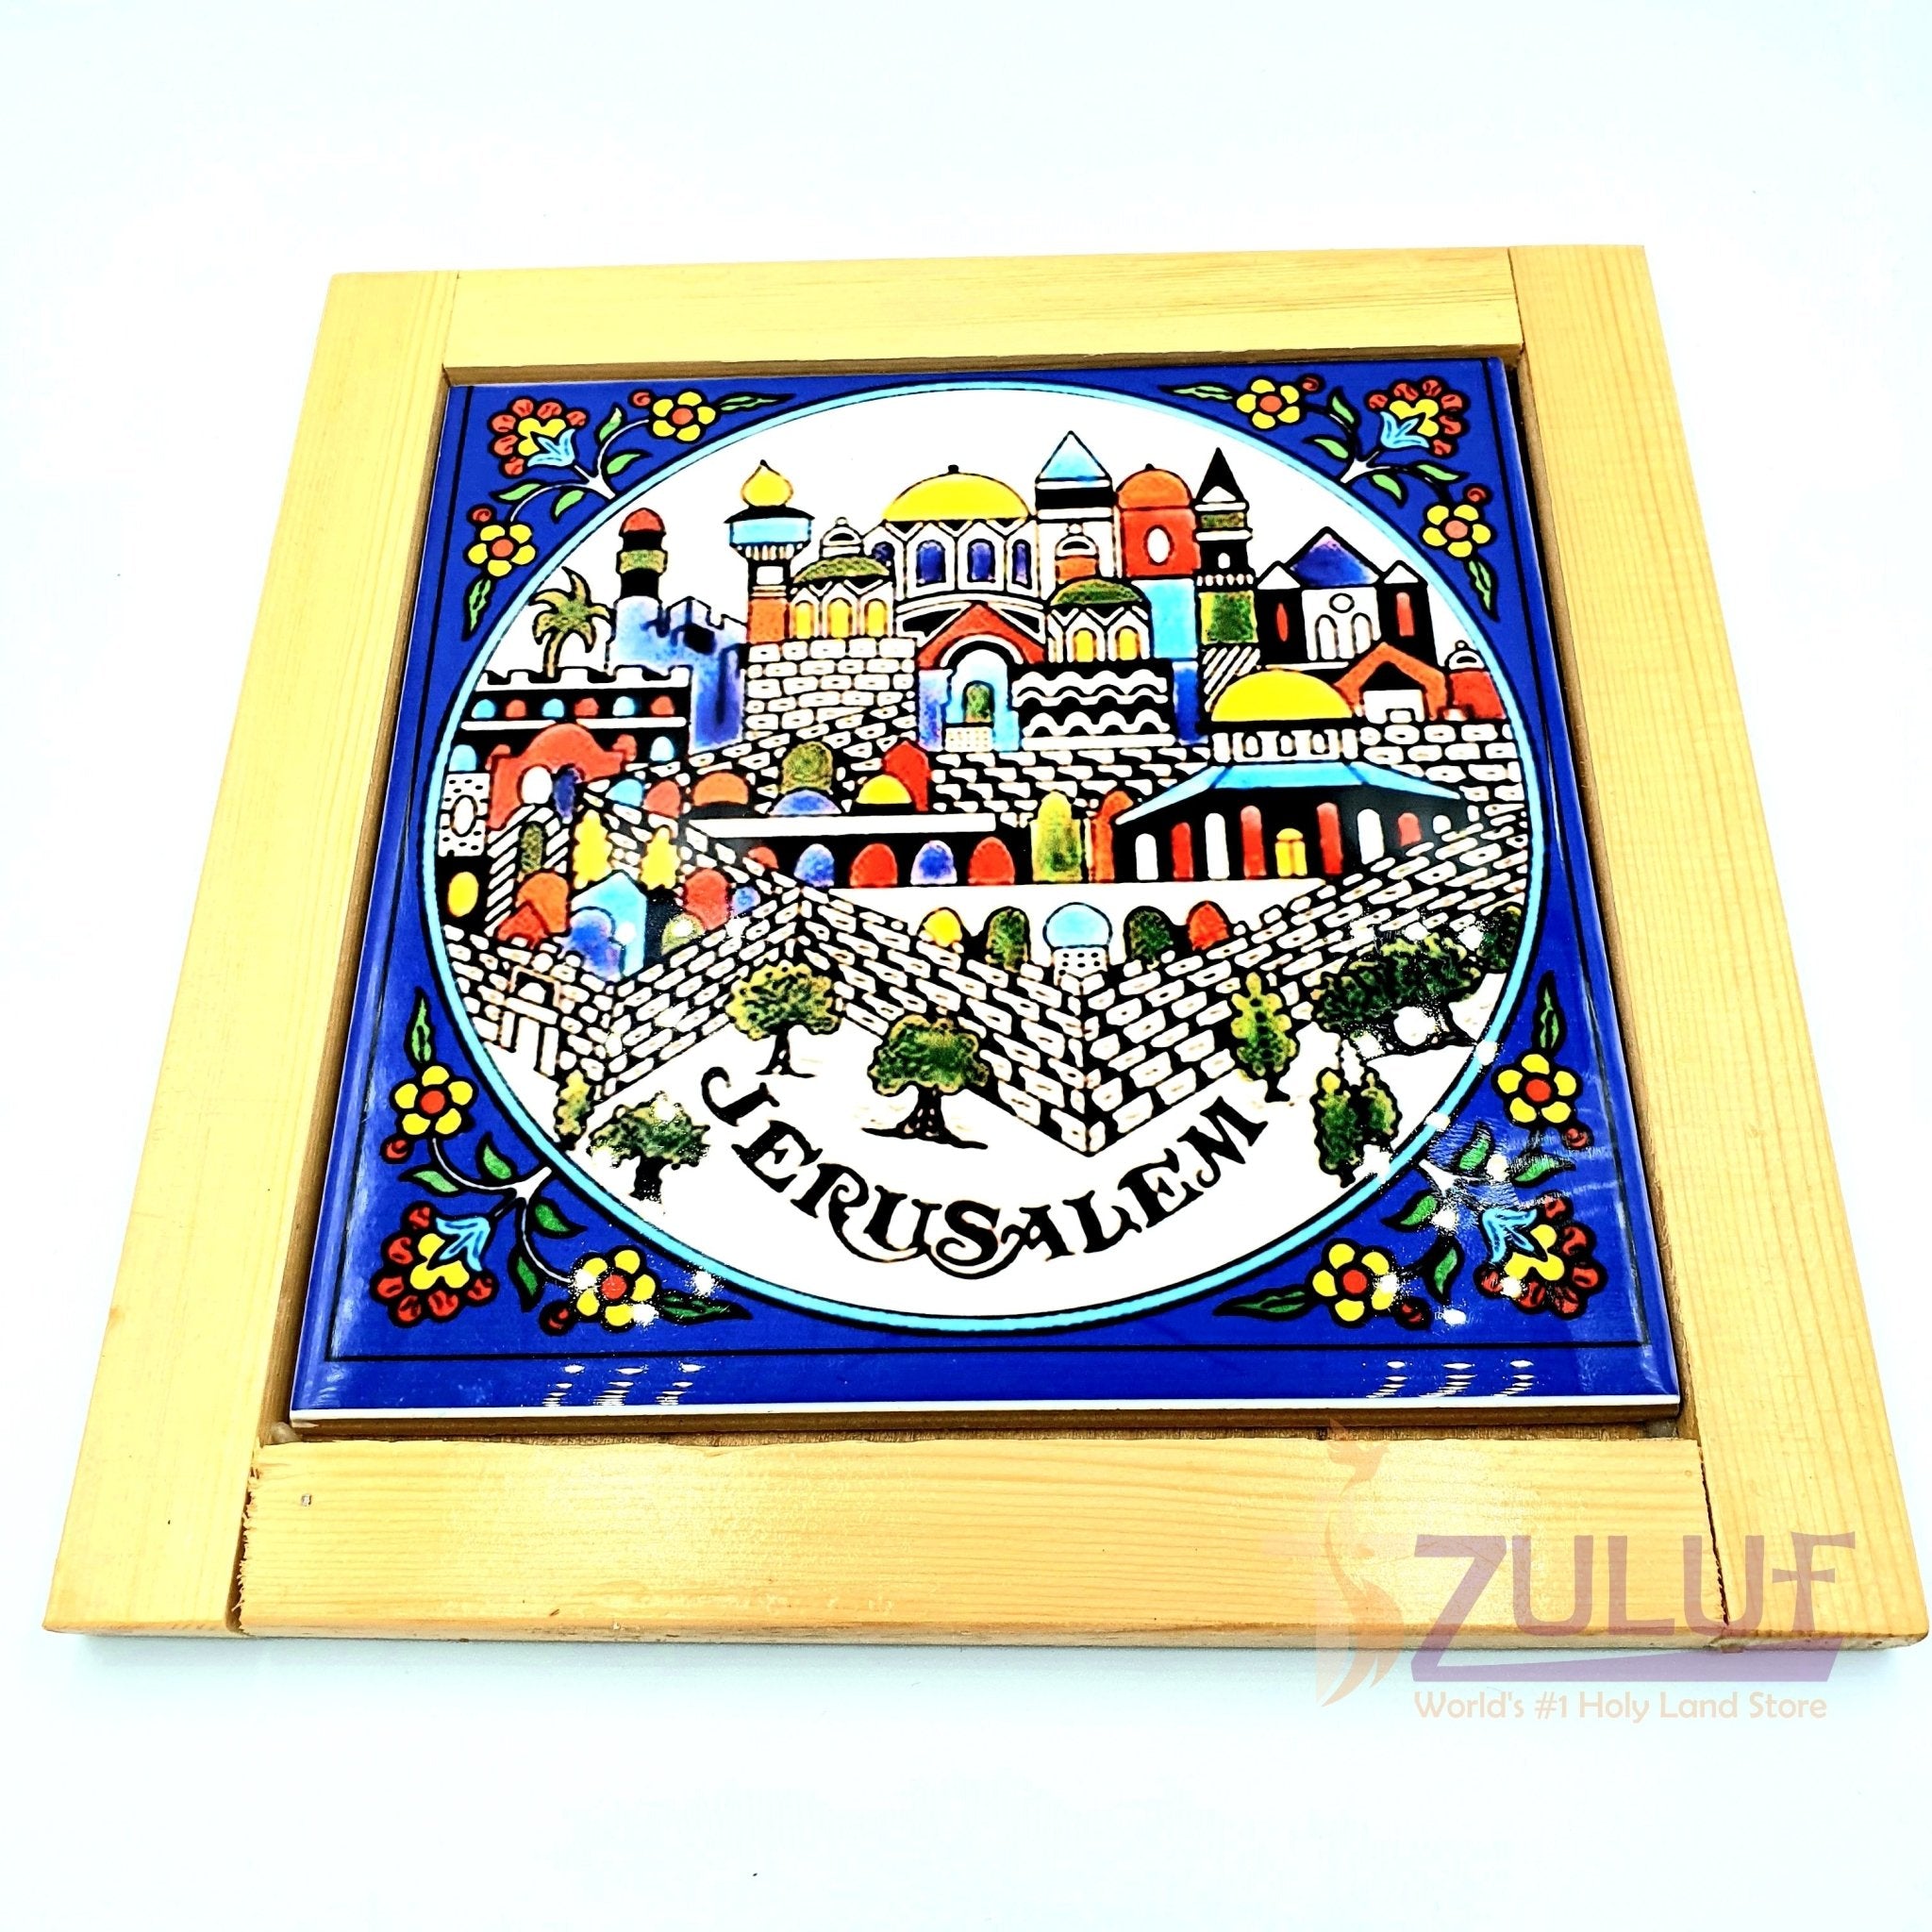 Armenian Ceramic Coaster - Tabgha - Miracle of Loaves and Fish 19cm / 7.6 " - CER008 - Zuluf